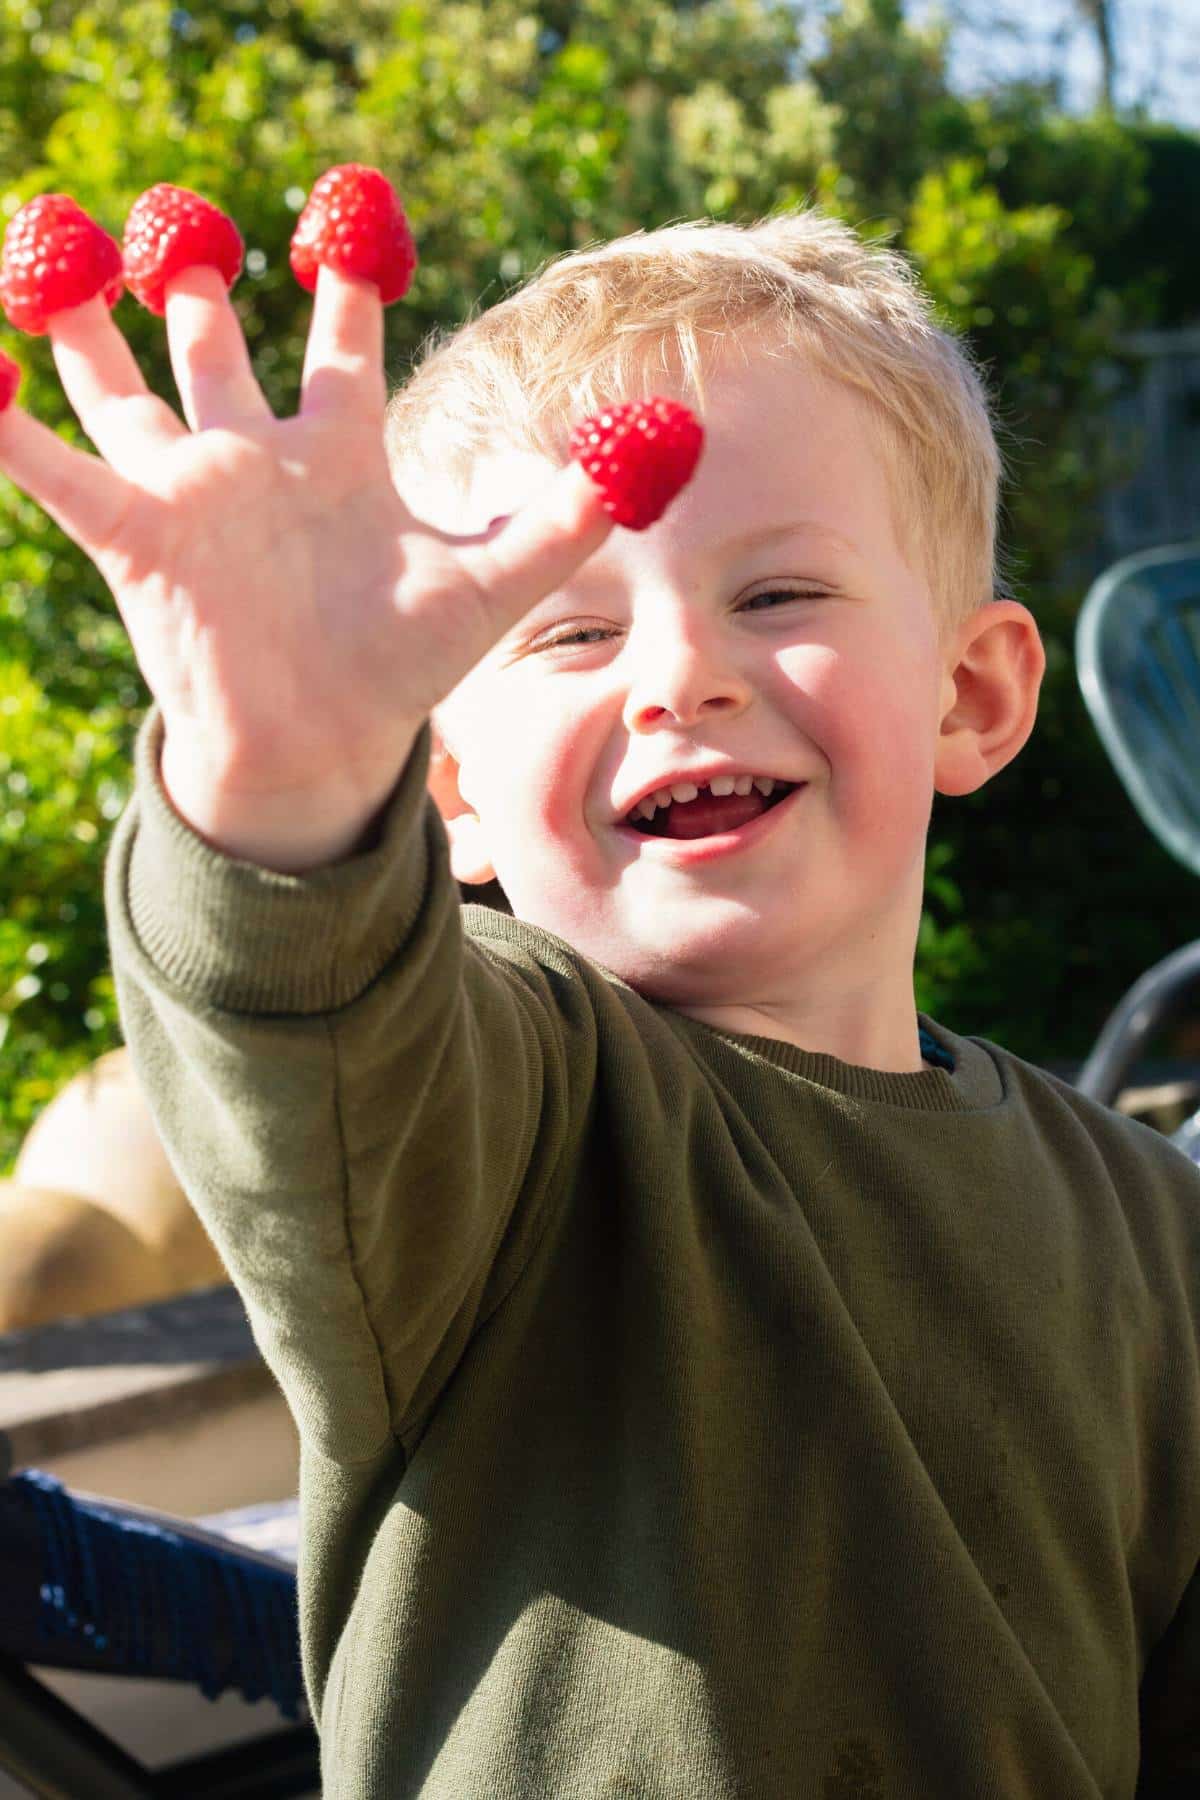 Little boy smiling, holding up his hand with raspberries on his finger tips. 